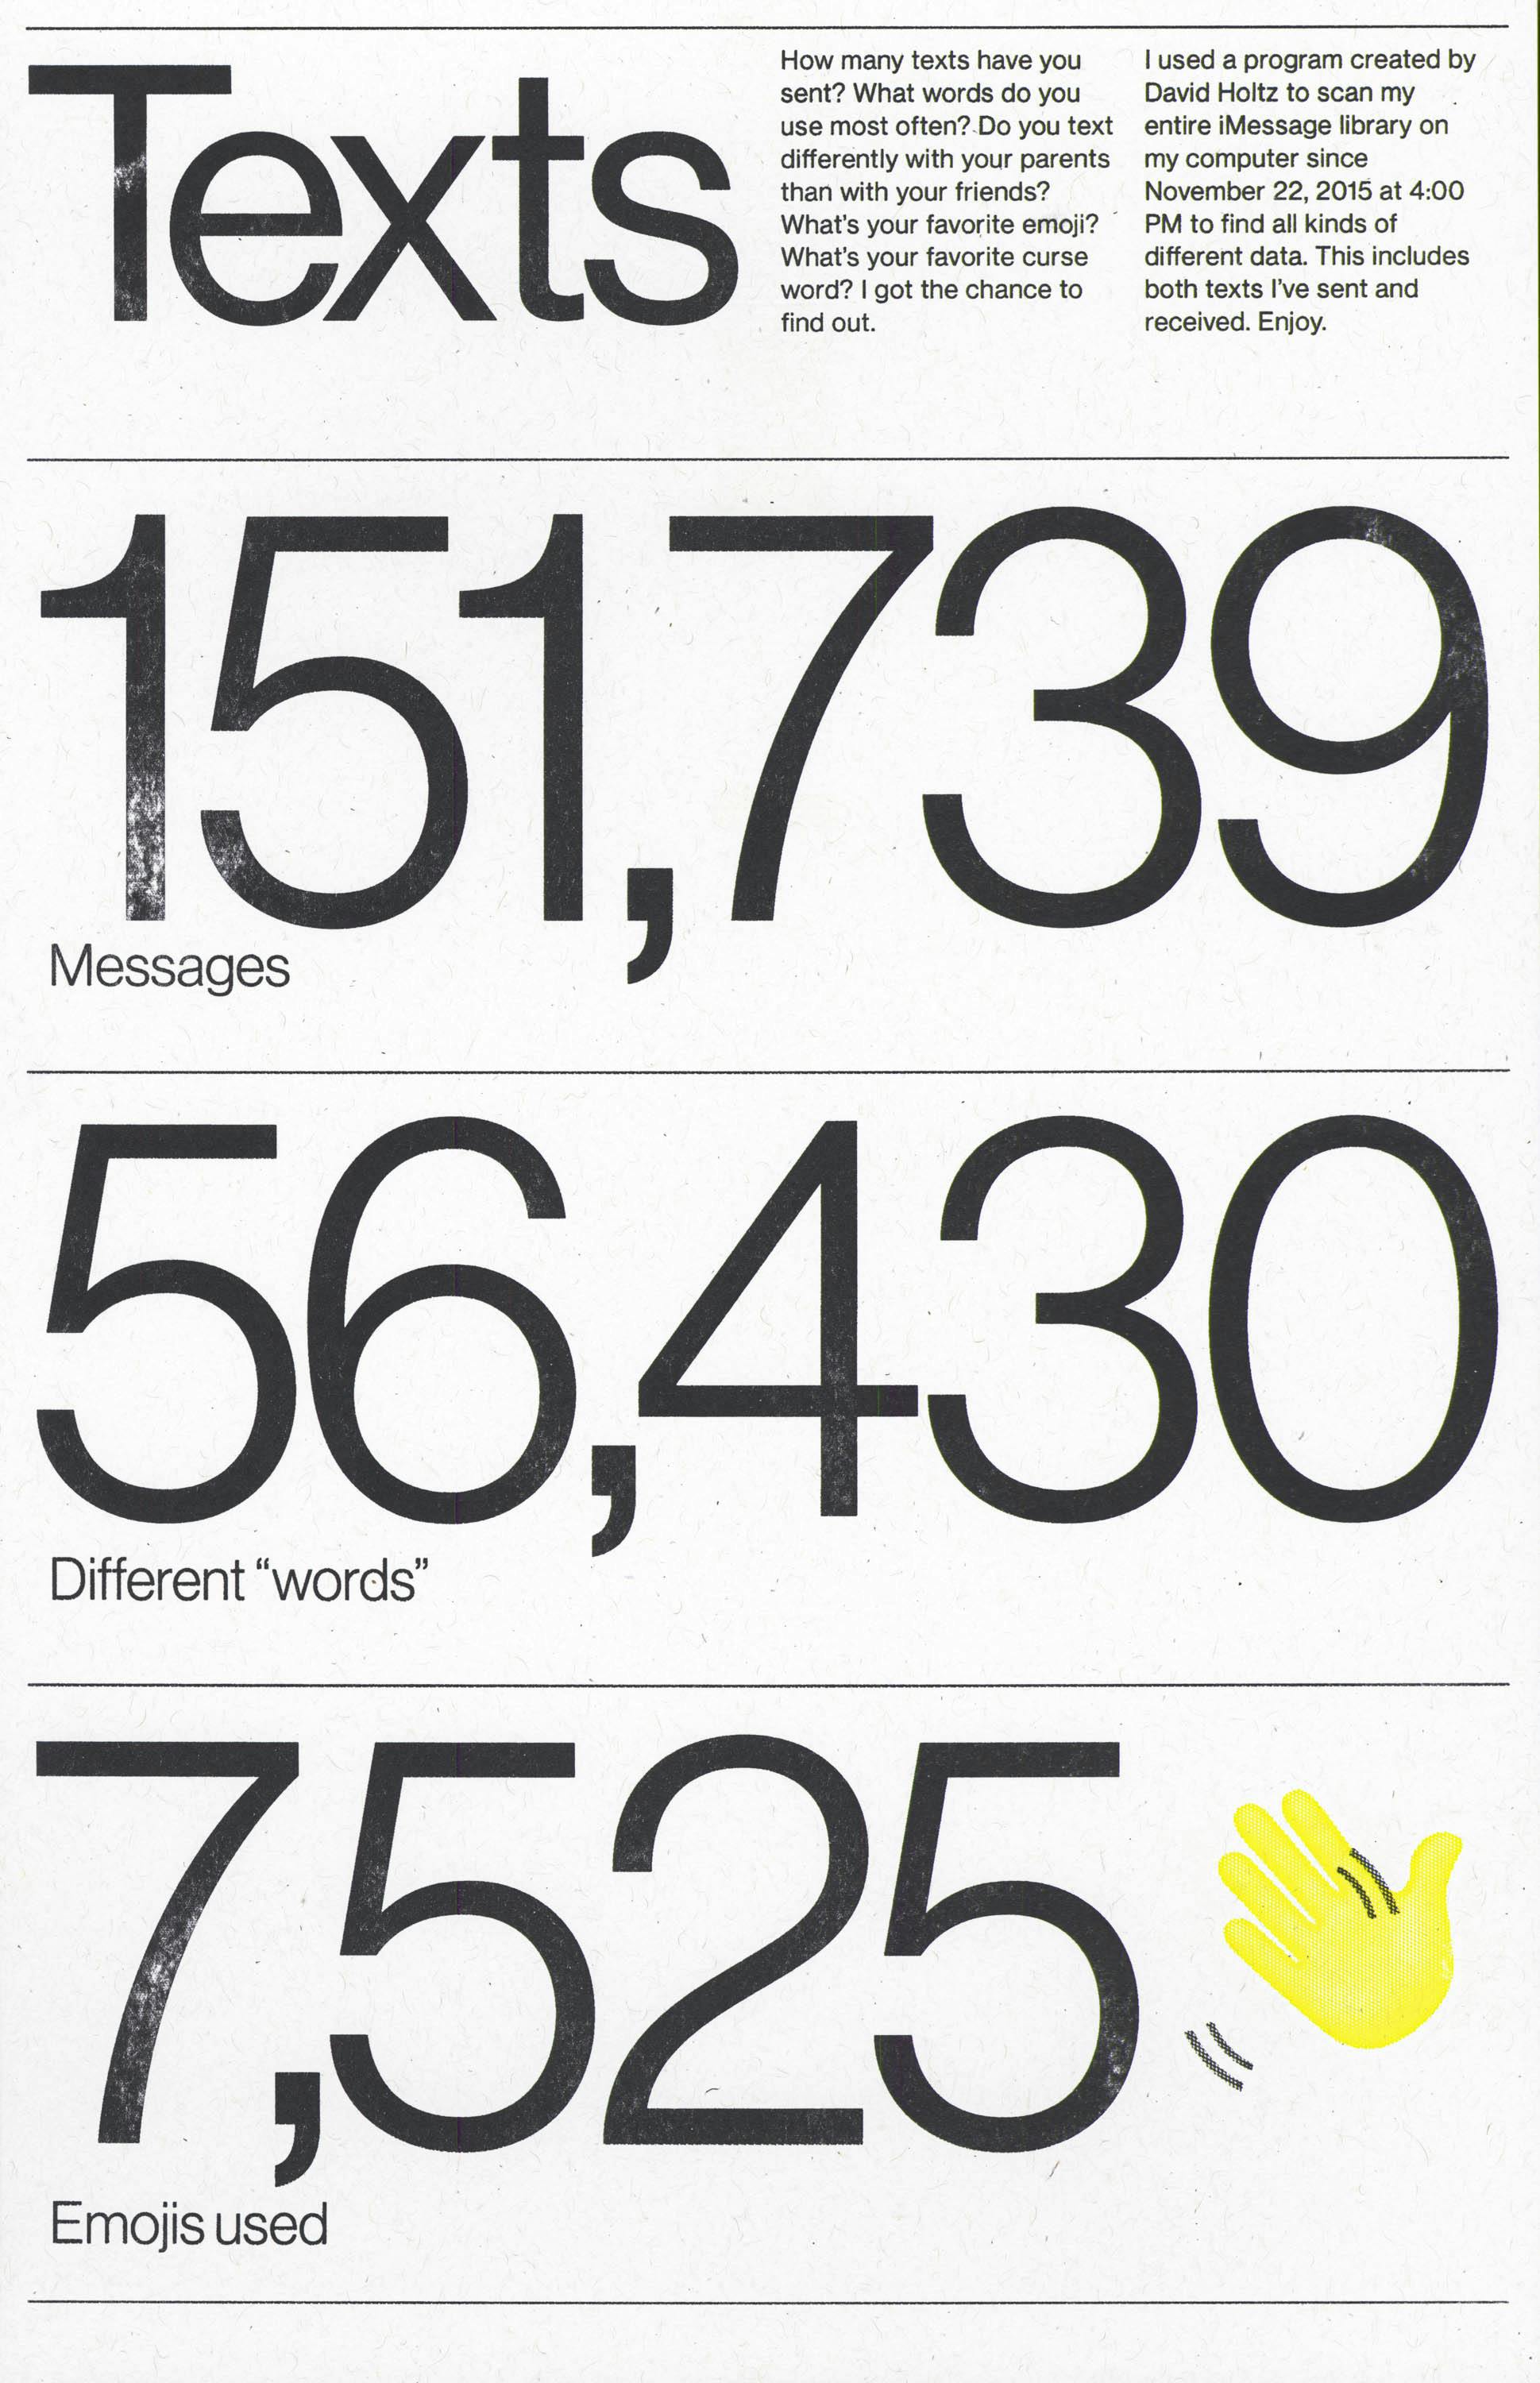 Infographic showing "Texts" statistics. Indicates 151,739 messages sent, 56,430 different words used, and 7,525 emojis used.